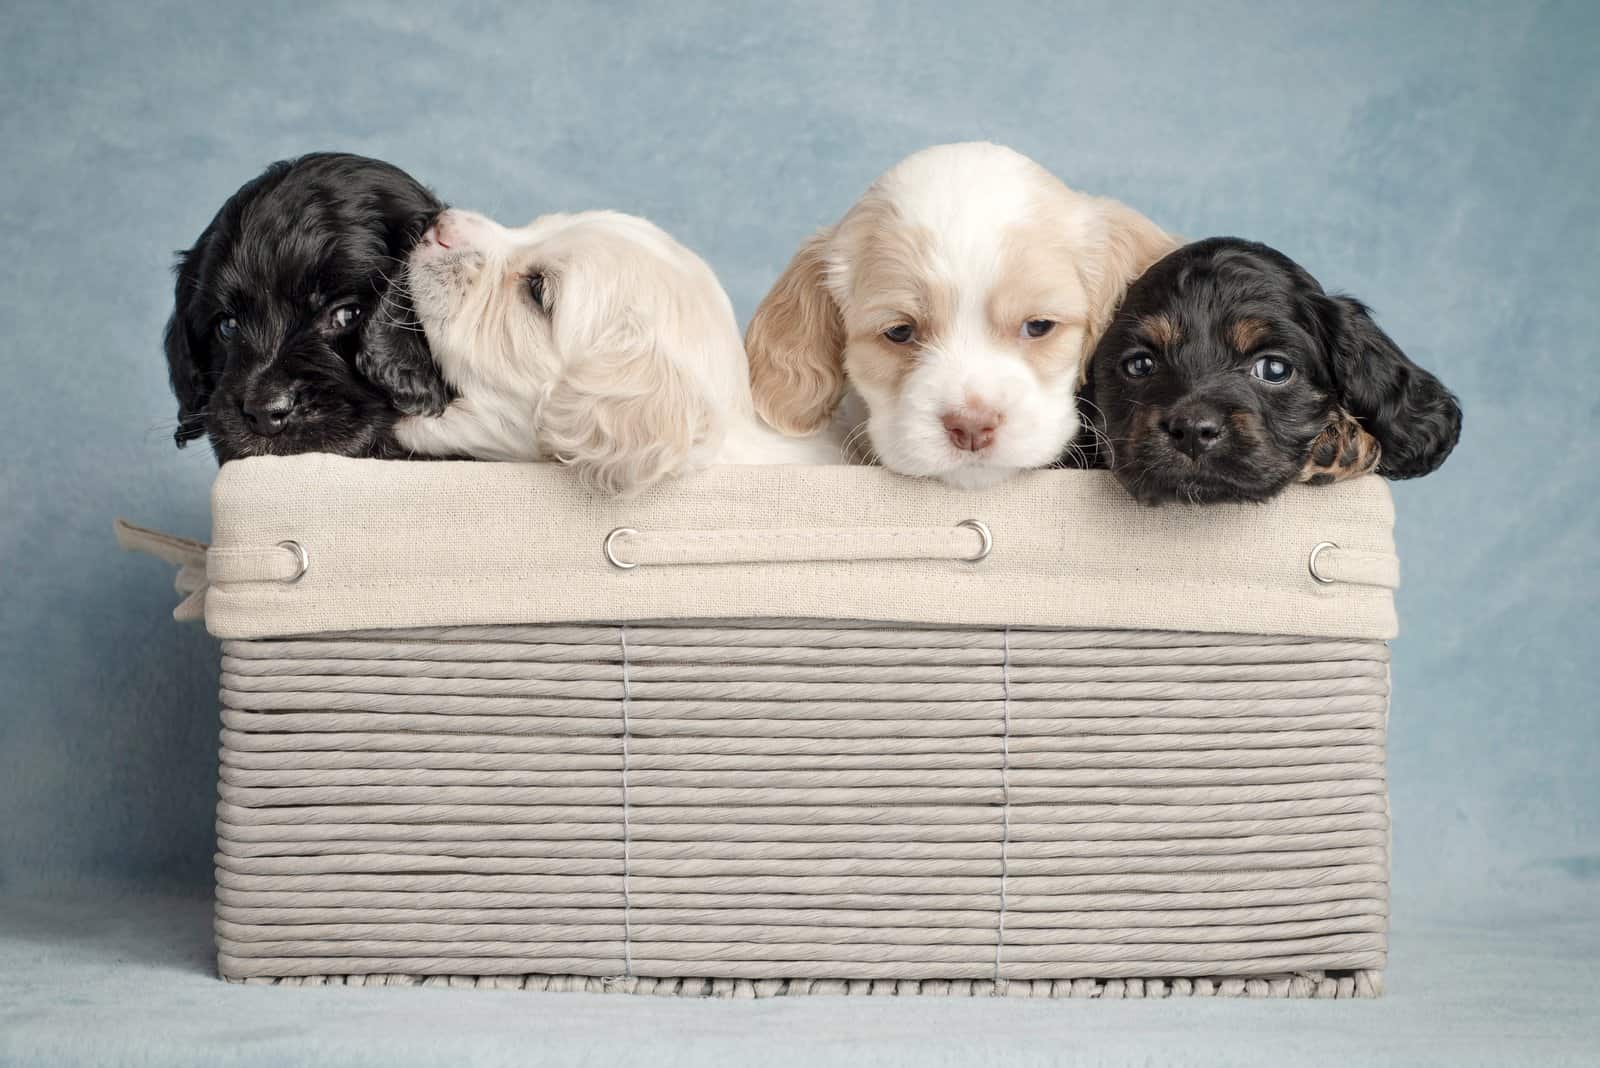 four puppies in a wicker basket